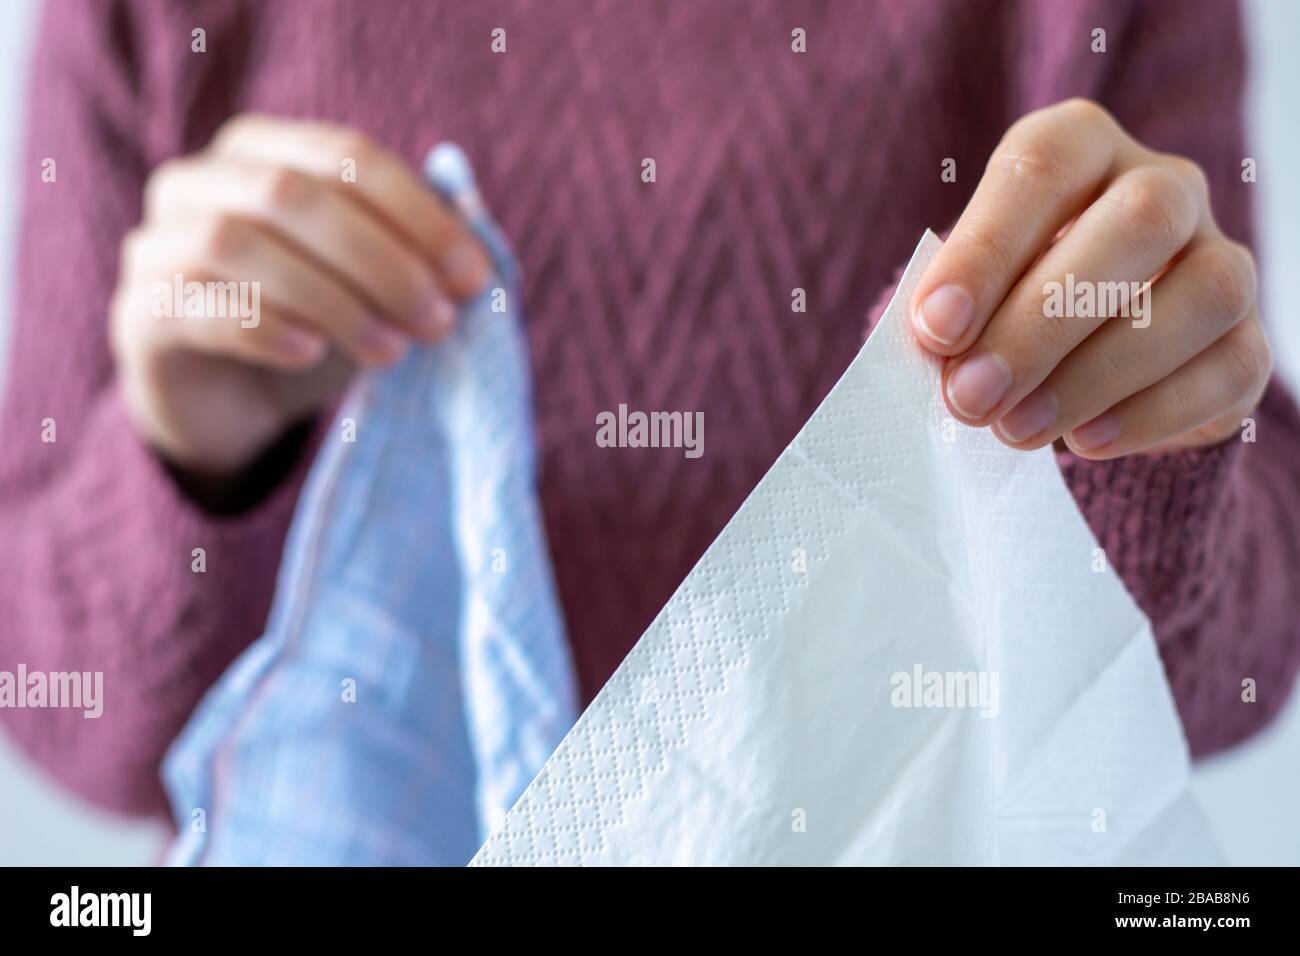 A woman is holding a paper tissue and a cotton handkerchief. Coronavirus advice includes use a disposable paper tissue instead of a cotton one Stock Photo